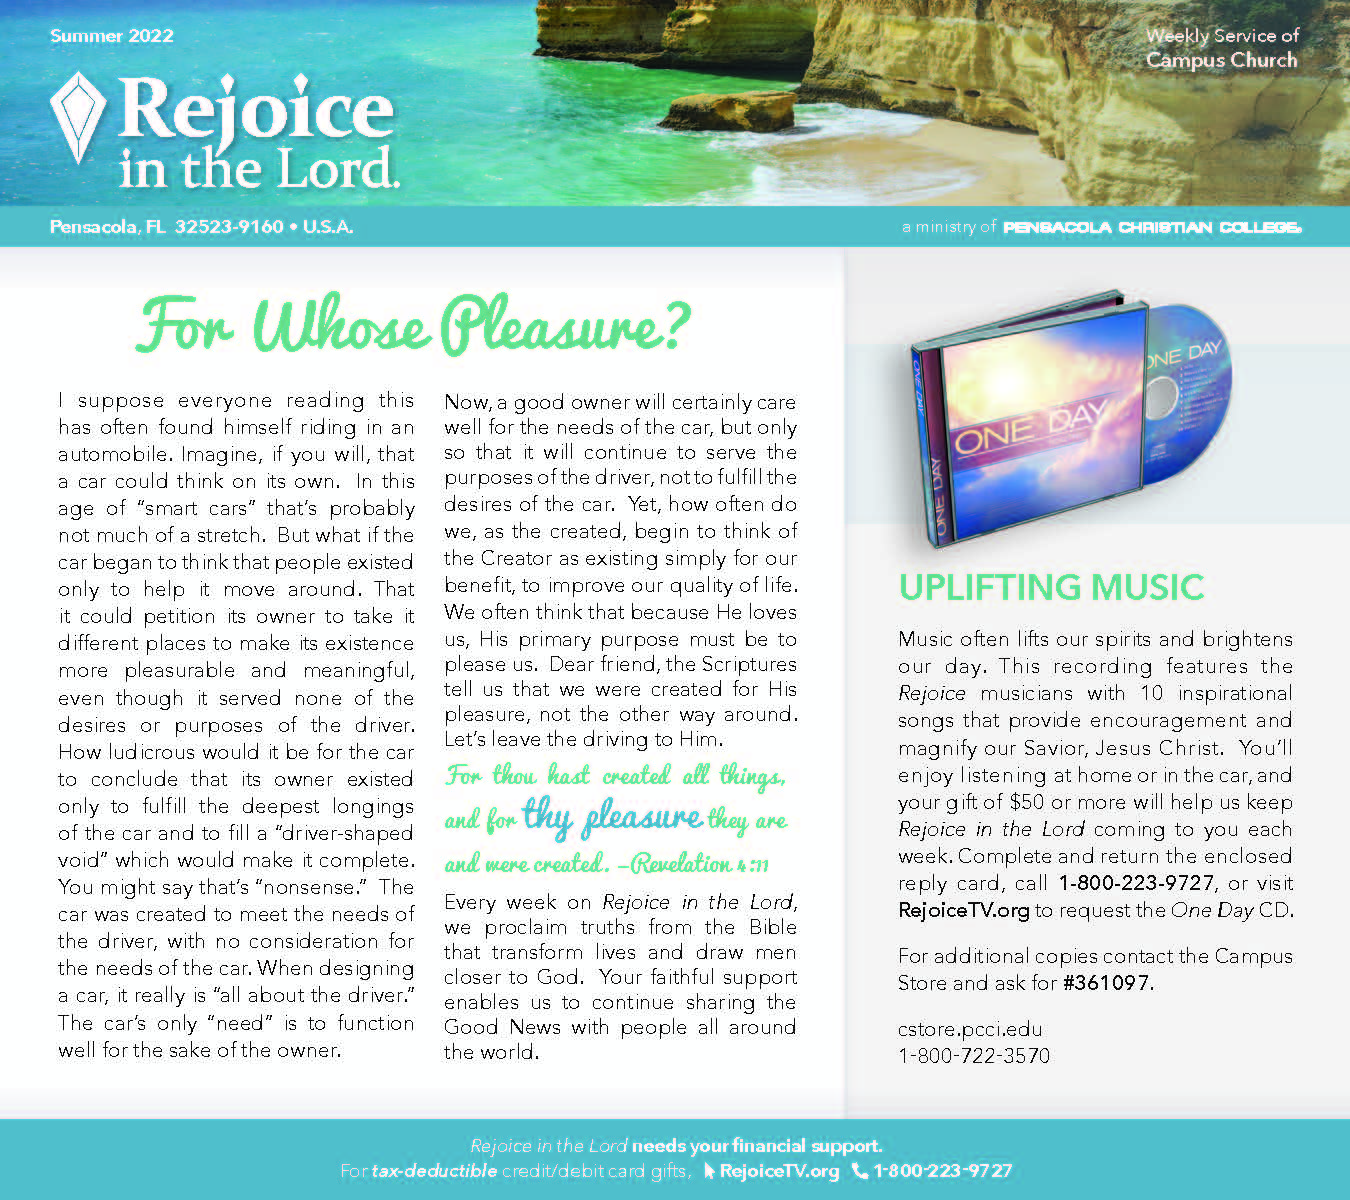 Summer 2022 Rejoice in the Lord Newsletter PDF